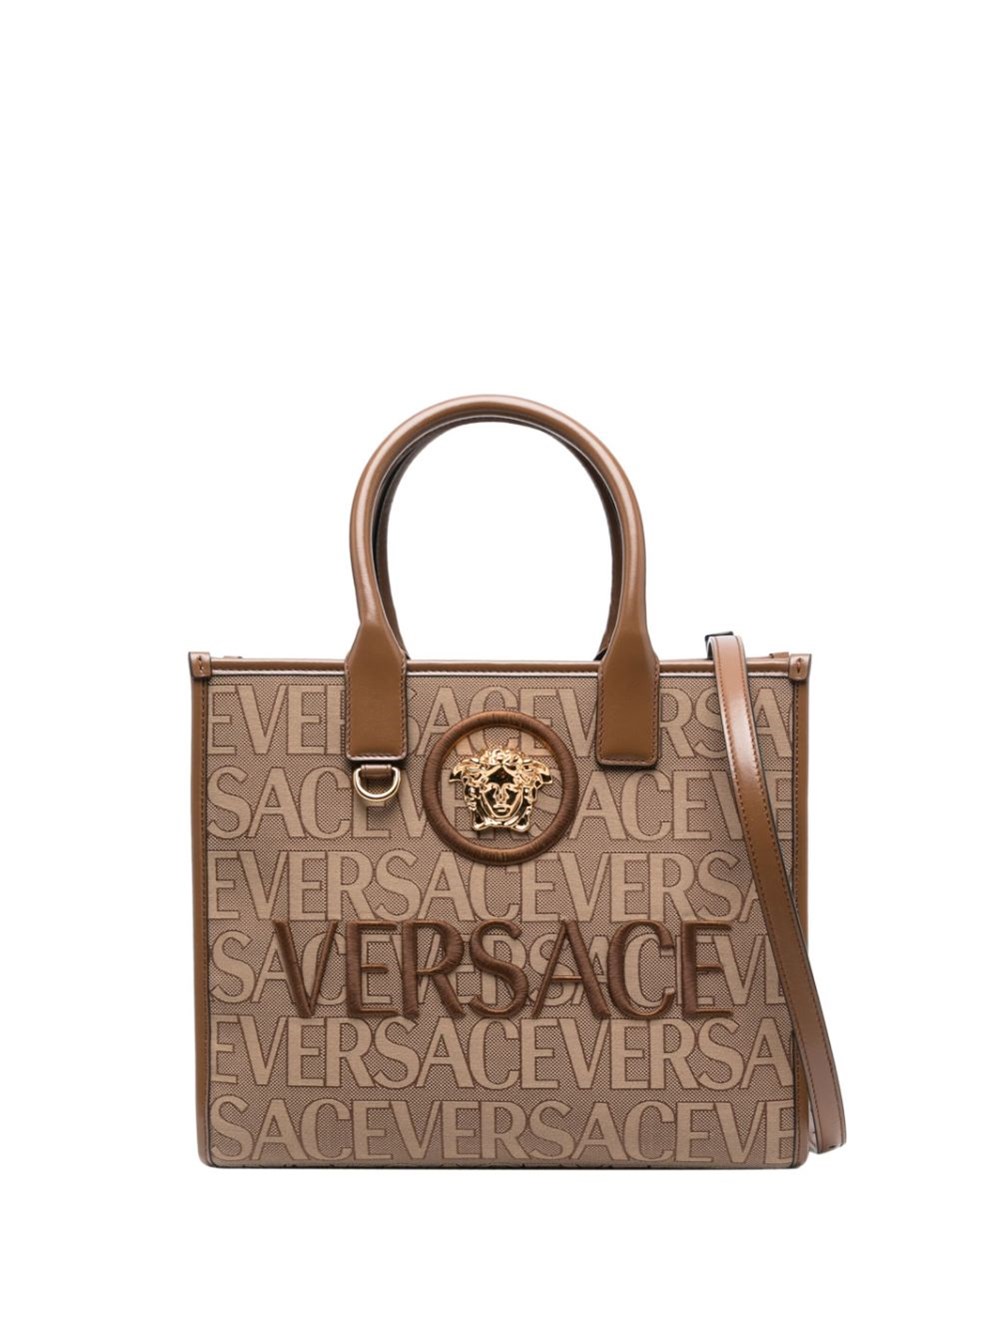 risorseutili.com on X: New arrivals Versace bags 2021 women's accessories  handbags collection. #bags #newarrivalsVersace #Versace #Versacebags  #Versacebags2021 #Versacecollection #Versacehandbags  #Versacewomensaccessories  https